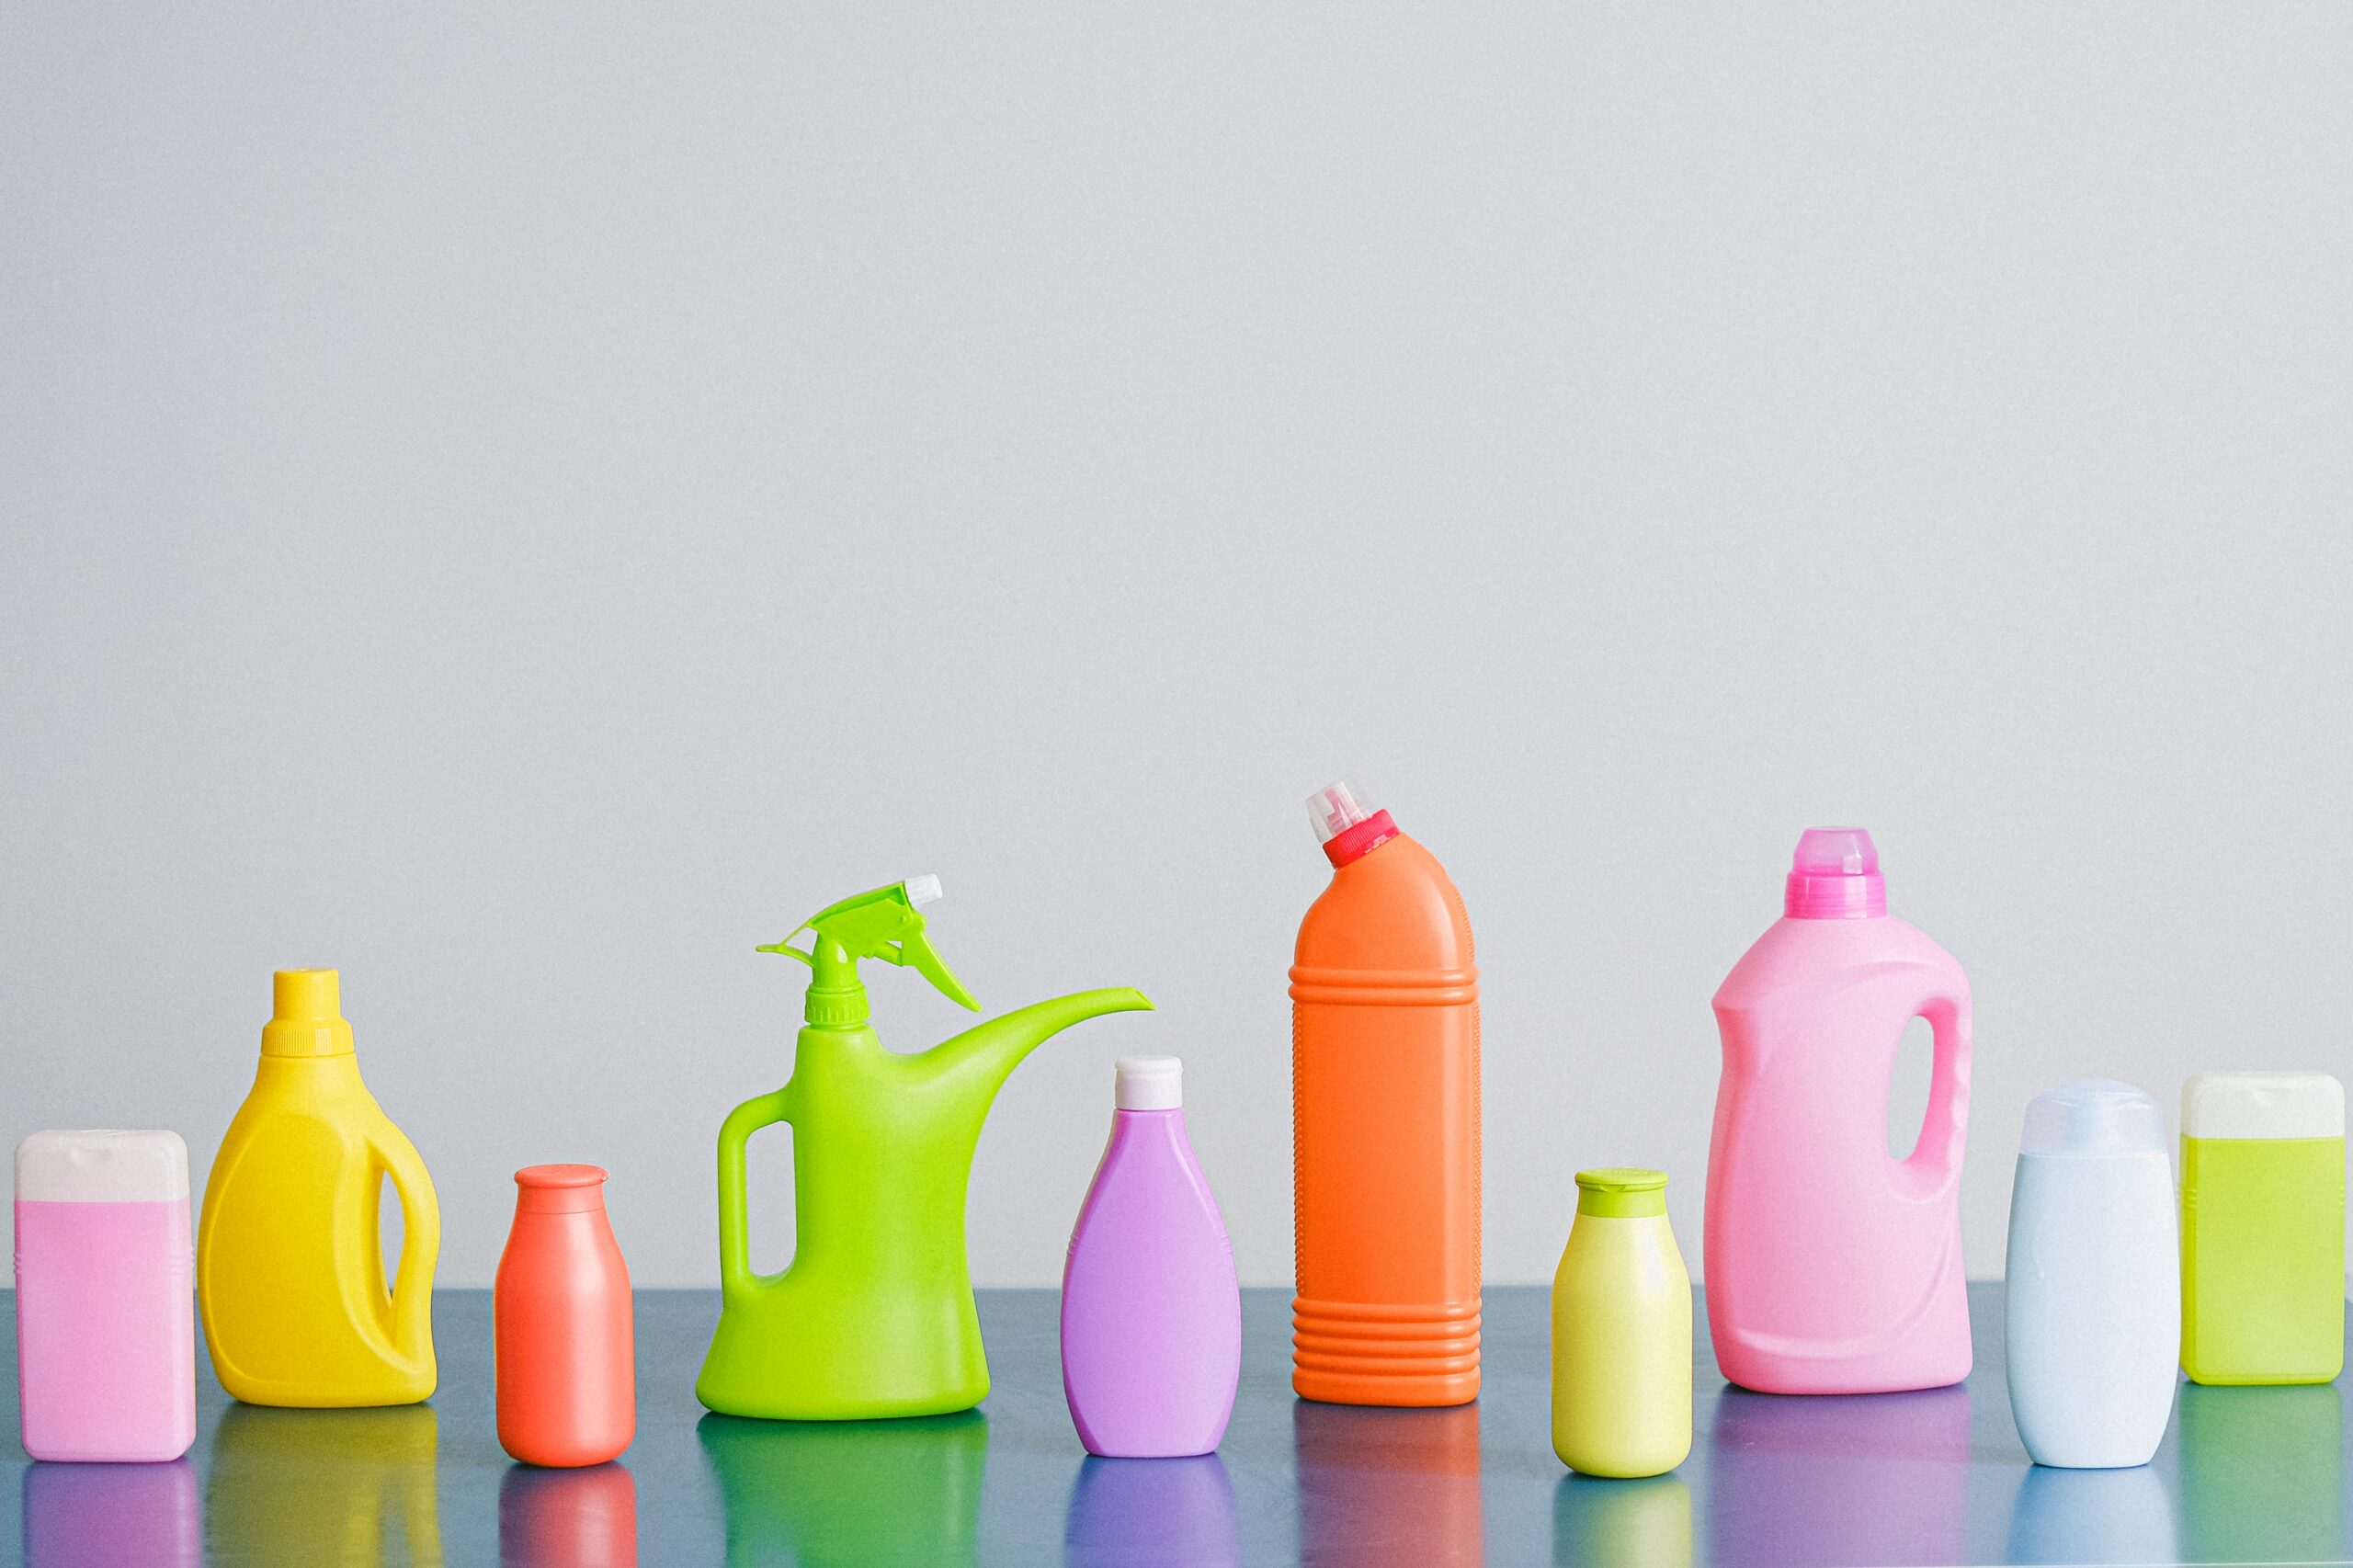 Are your cleaning products really green? Here’s how to tell.